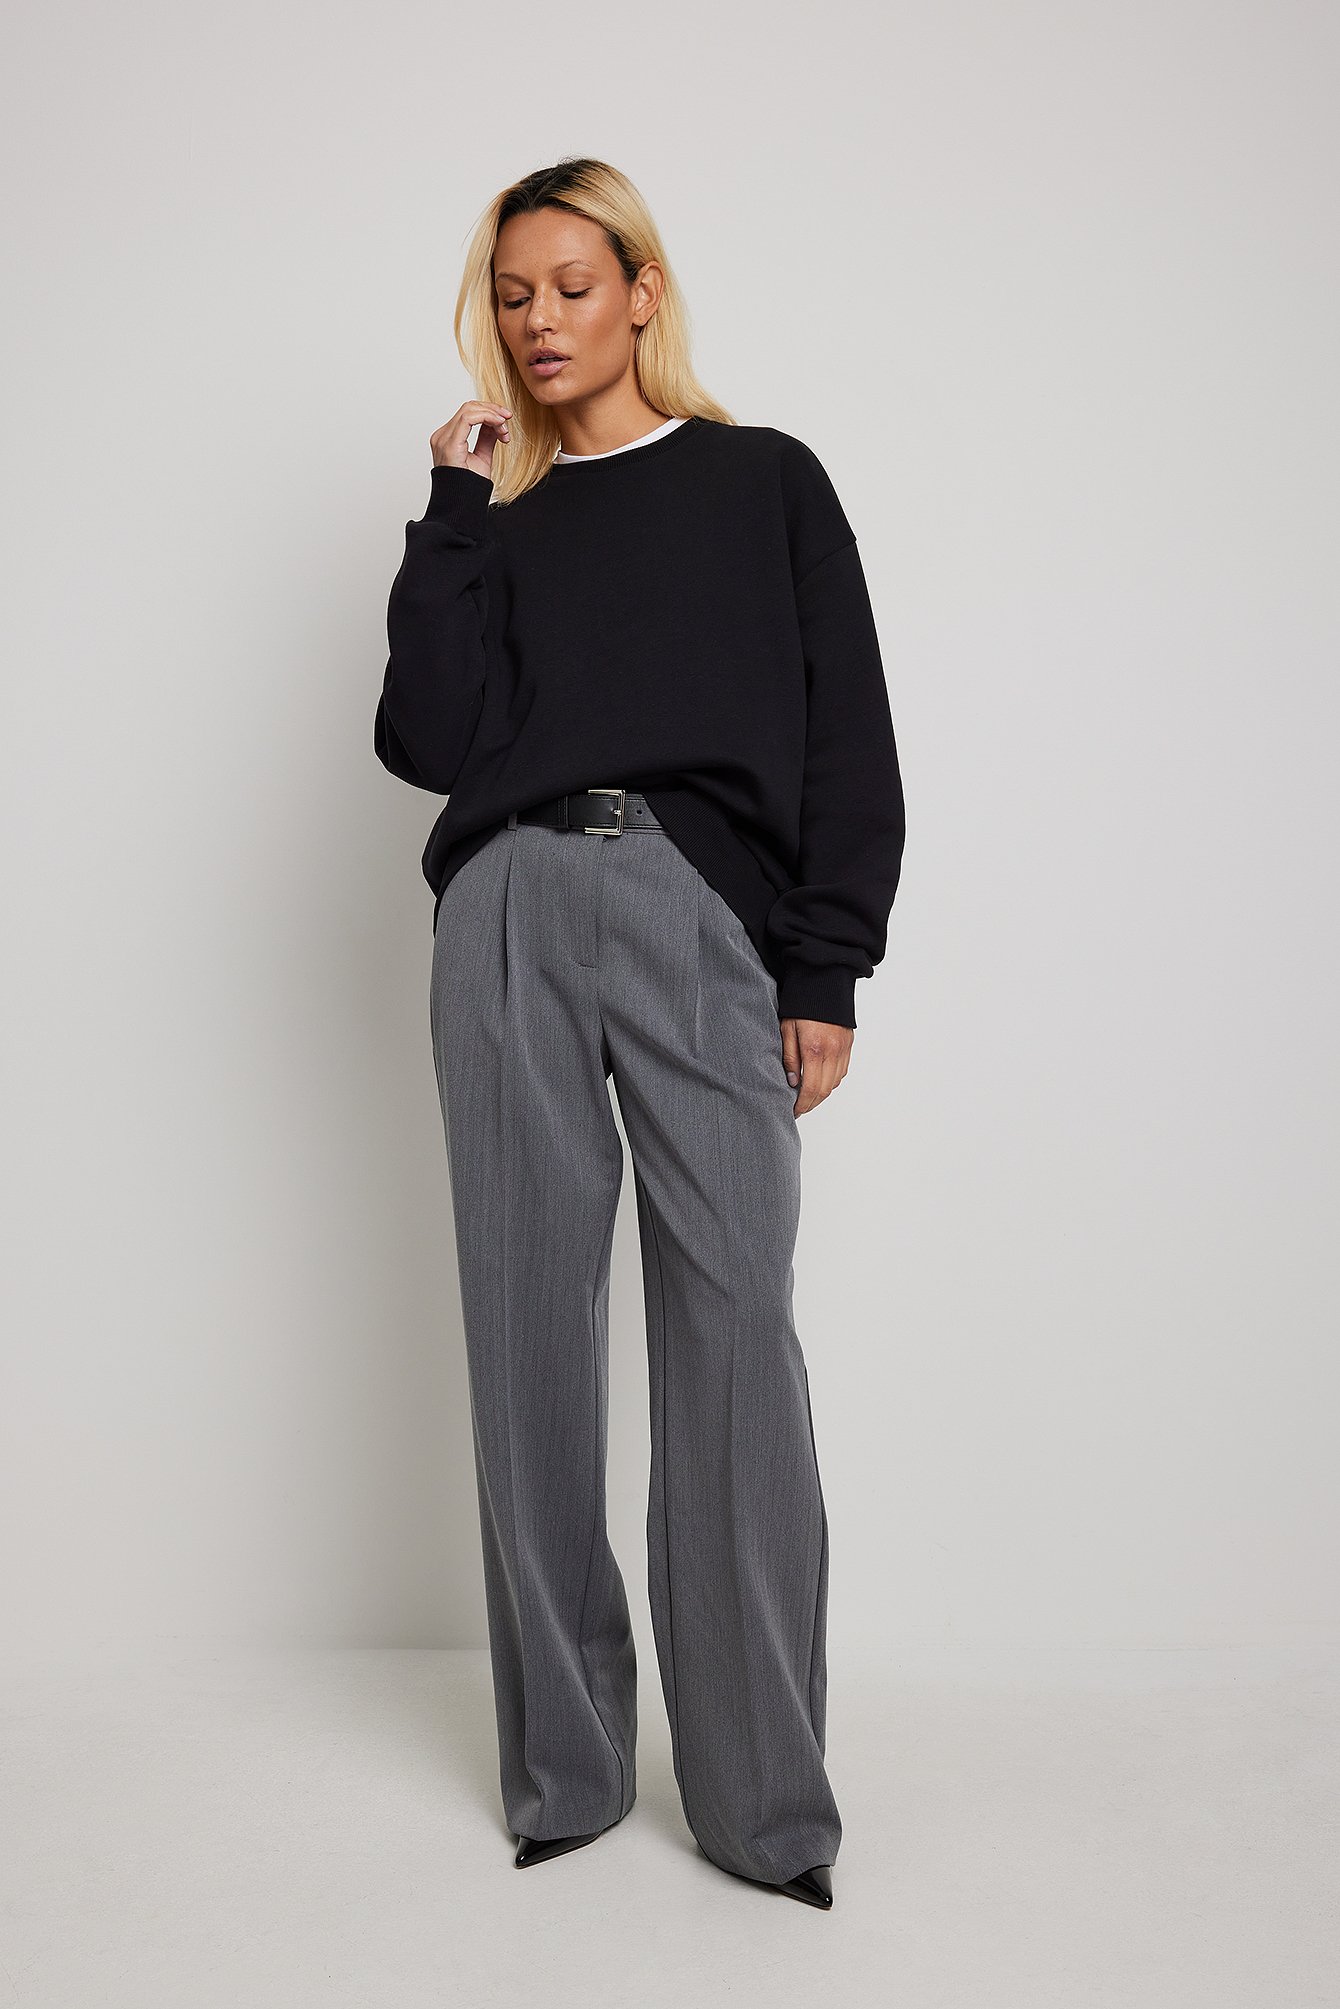 DAZY Fold Pleated Tailored Pants  Casual outfits Casual style outfits  Trouser outfits